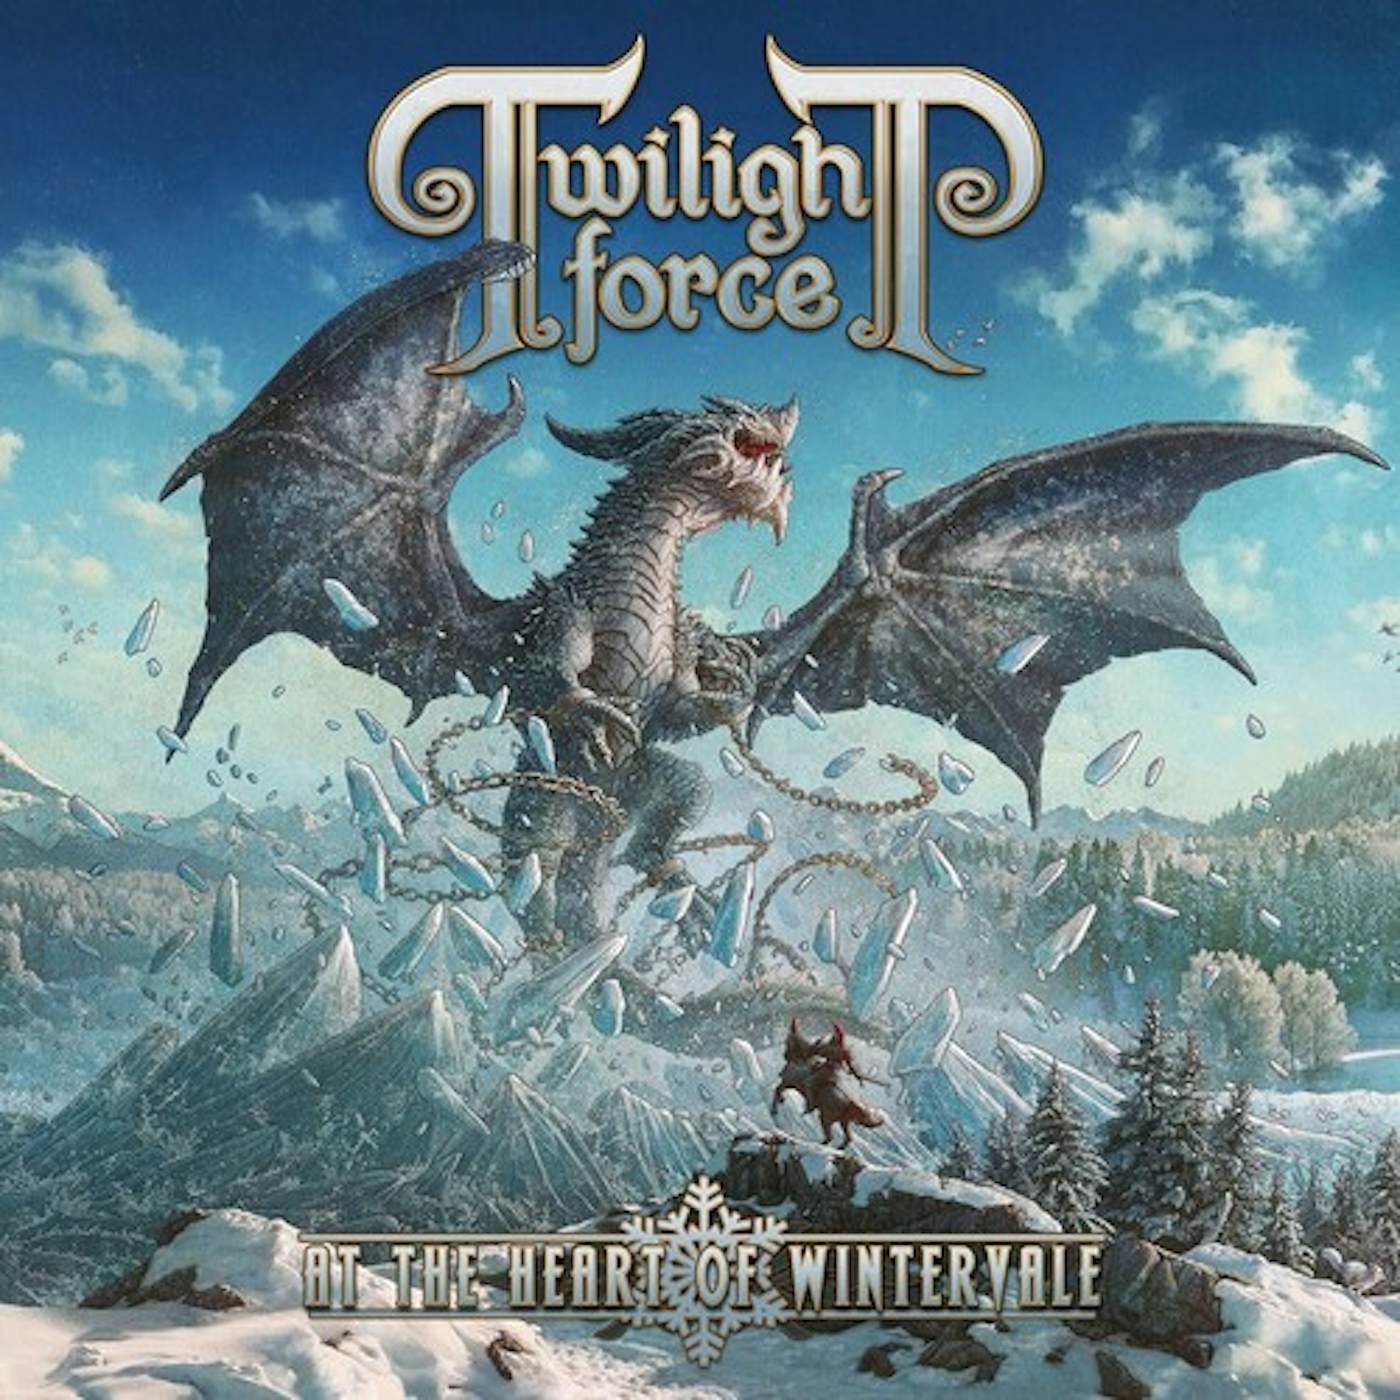 Twilight Force AT THE HEART OF WINTERVALE - ICE BLUE Vinyl Record